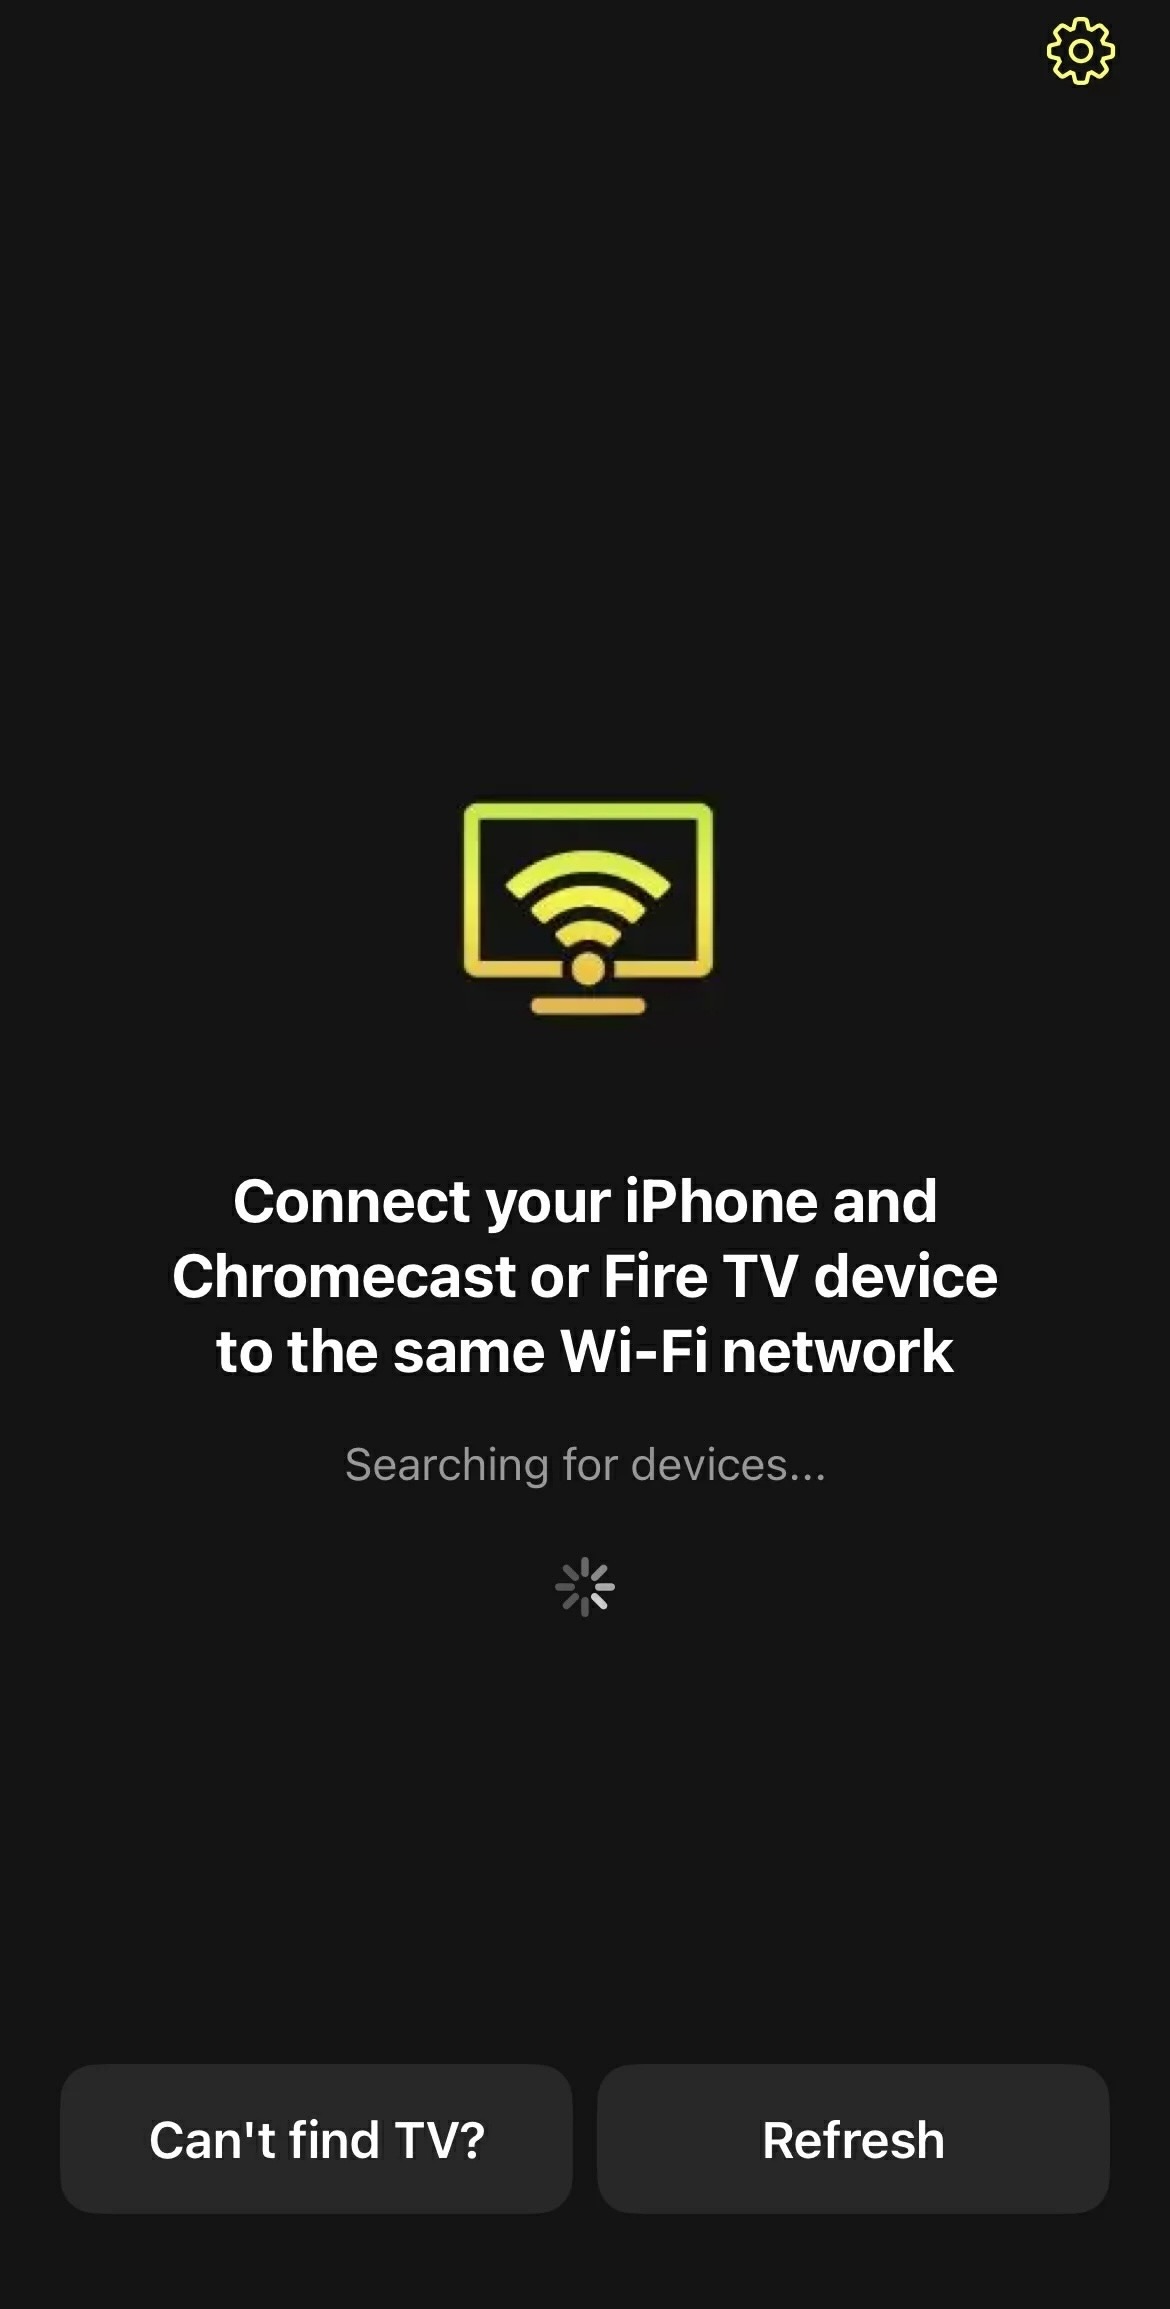 DoCast is searching for Firestick and Chromecast devices